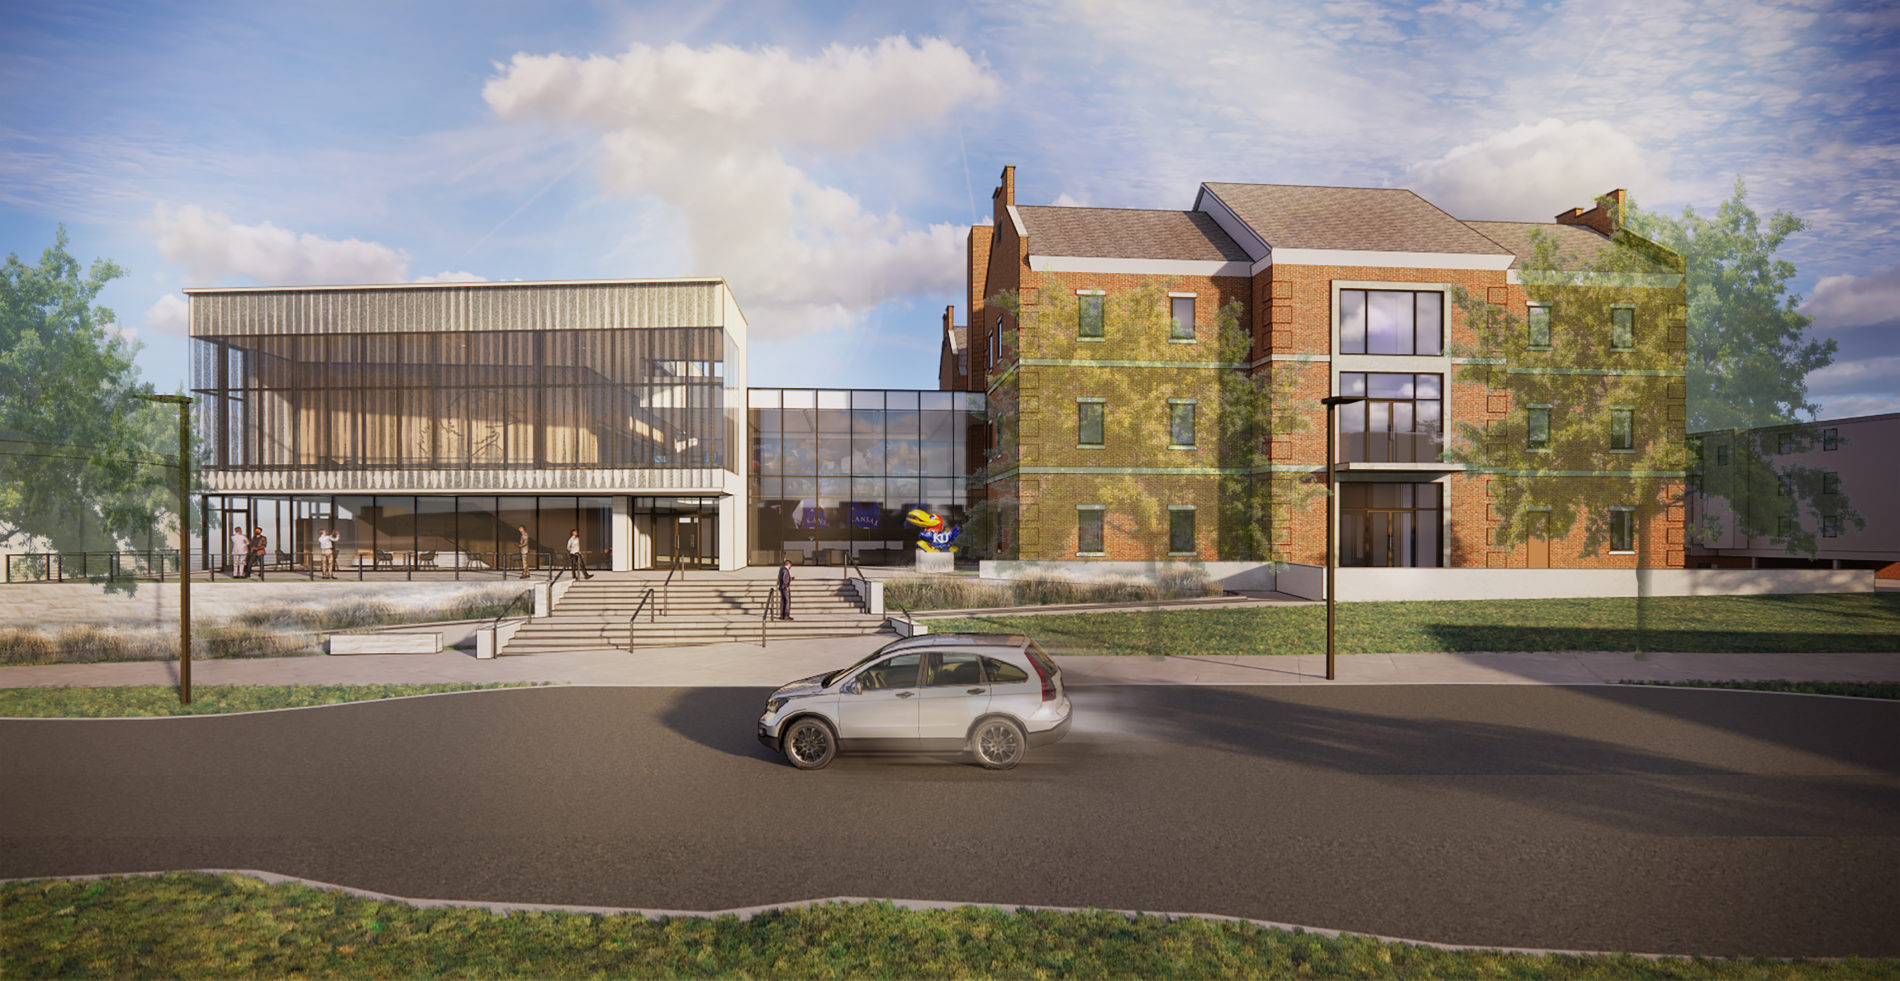 A rendering of the exterior of the University of Kansas Jayhawk Welcome Center being built by McCownGordon Construction